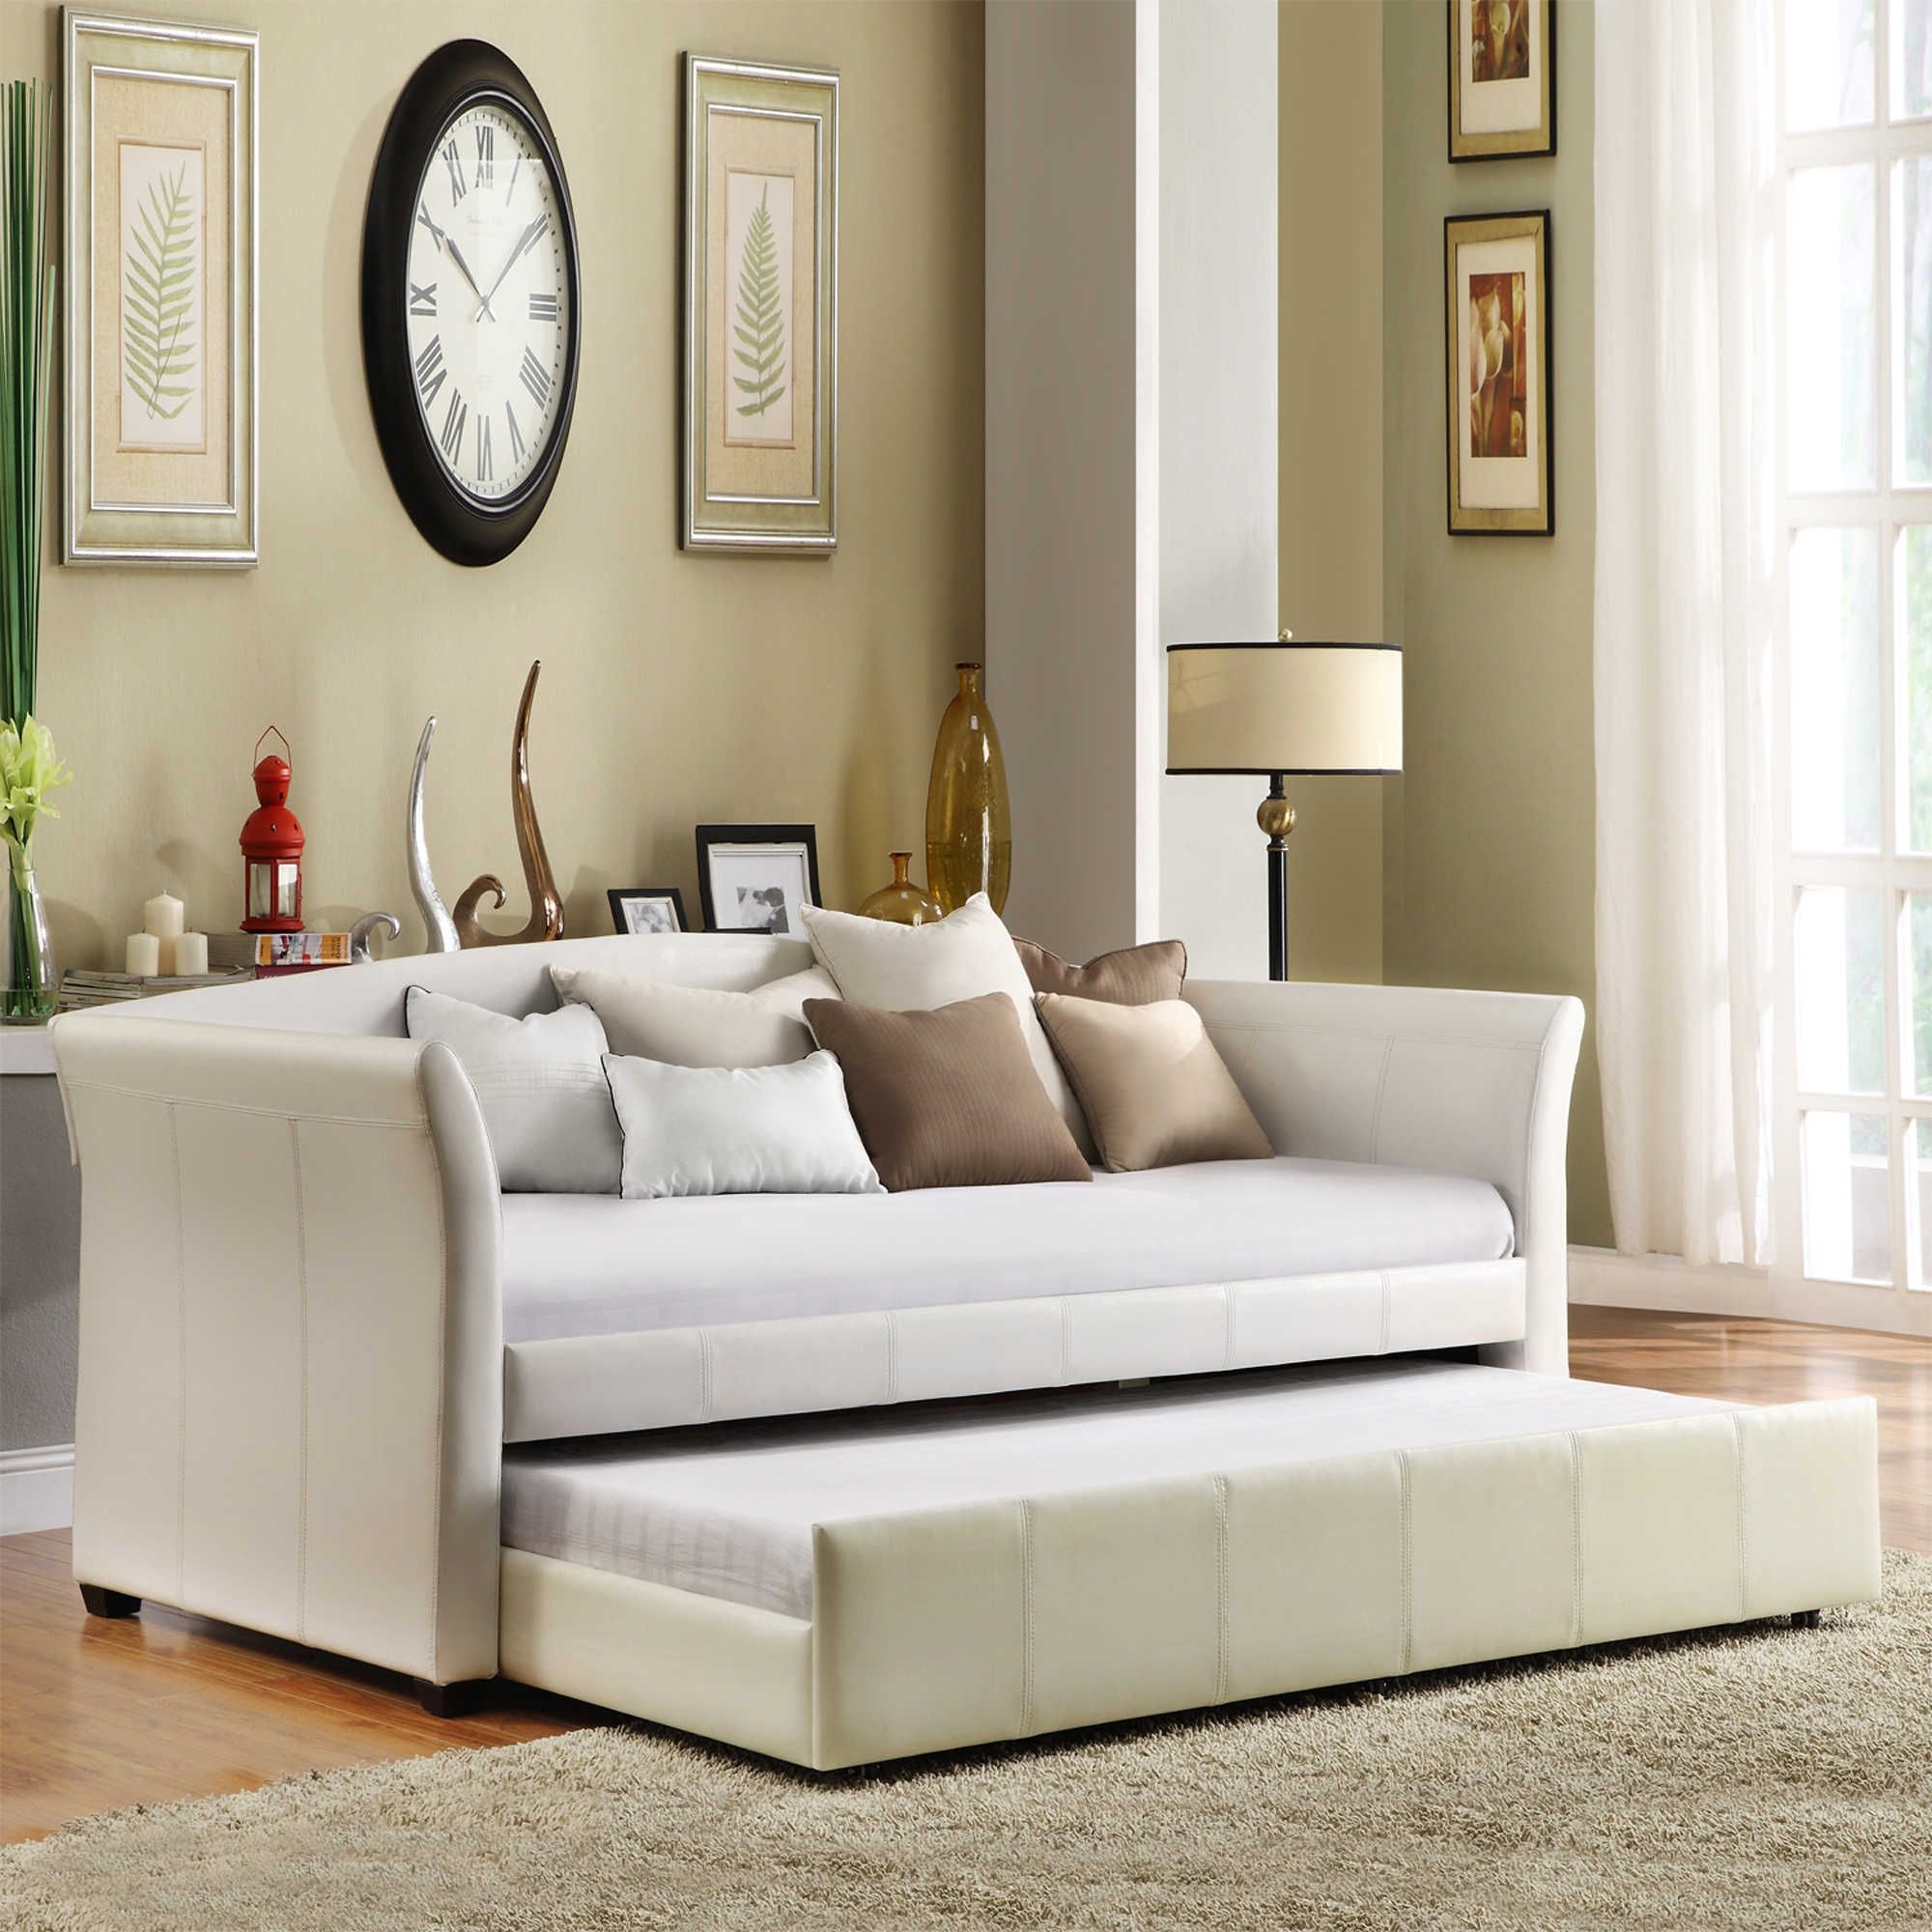 Tribecca home deco white faux leather modern daybed with trundle